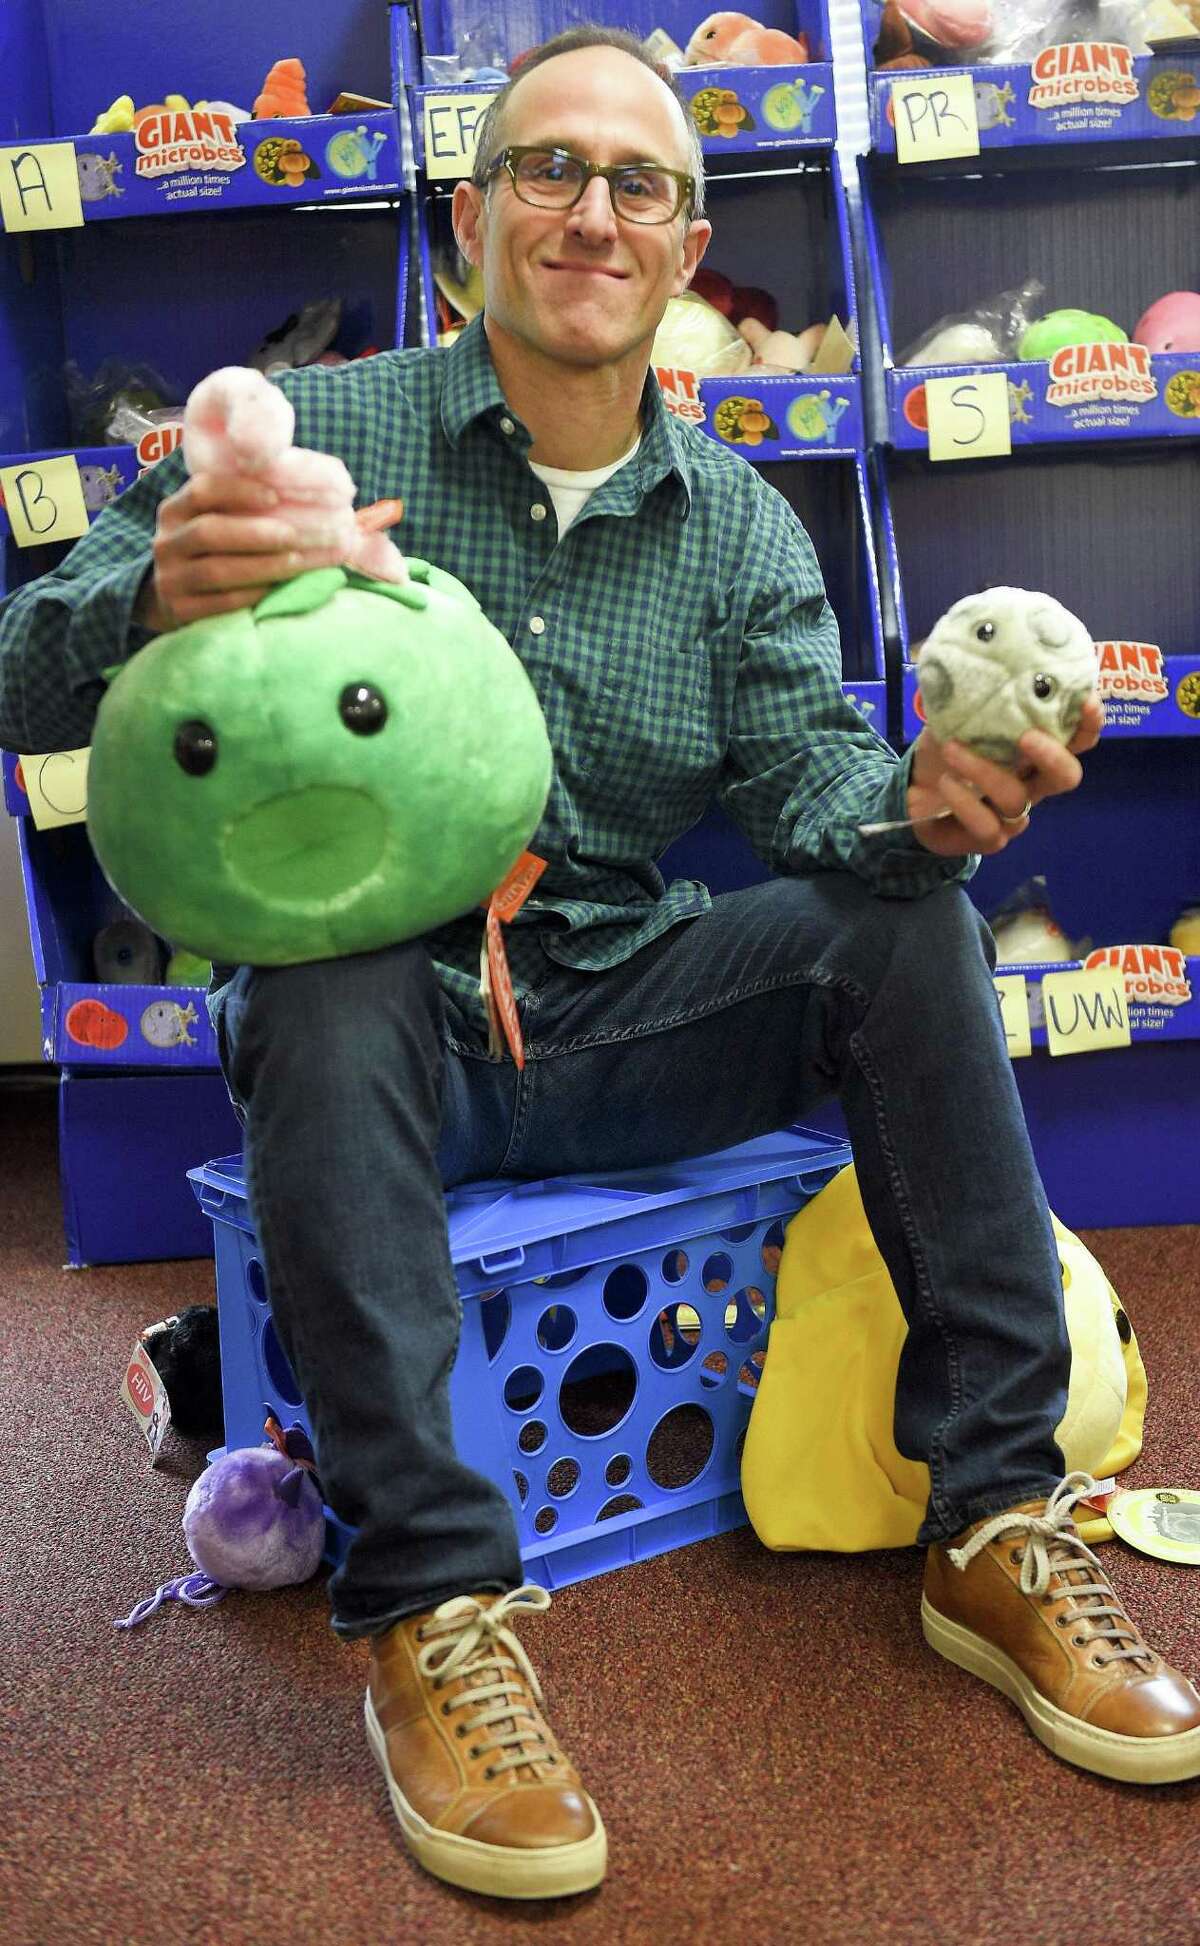 Andrew Klein, CEO of Giant Microbes, a Stamford-based toymaker is photographed on April 6, 2018 in Stamford, Connecticut. Klein's company recently released plush dolls depicting sexually transmitted diseases, such as Chlamydia and Herpes, along with eight other commonly known STD's, as part of the STD awareness month campaign.